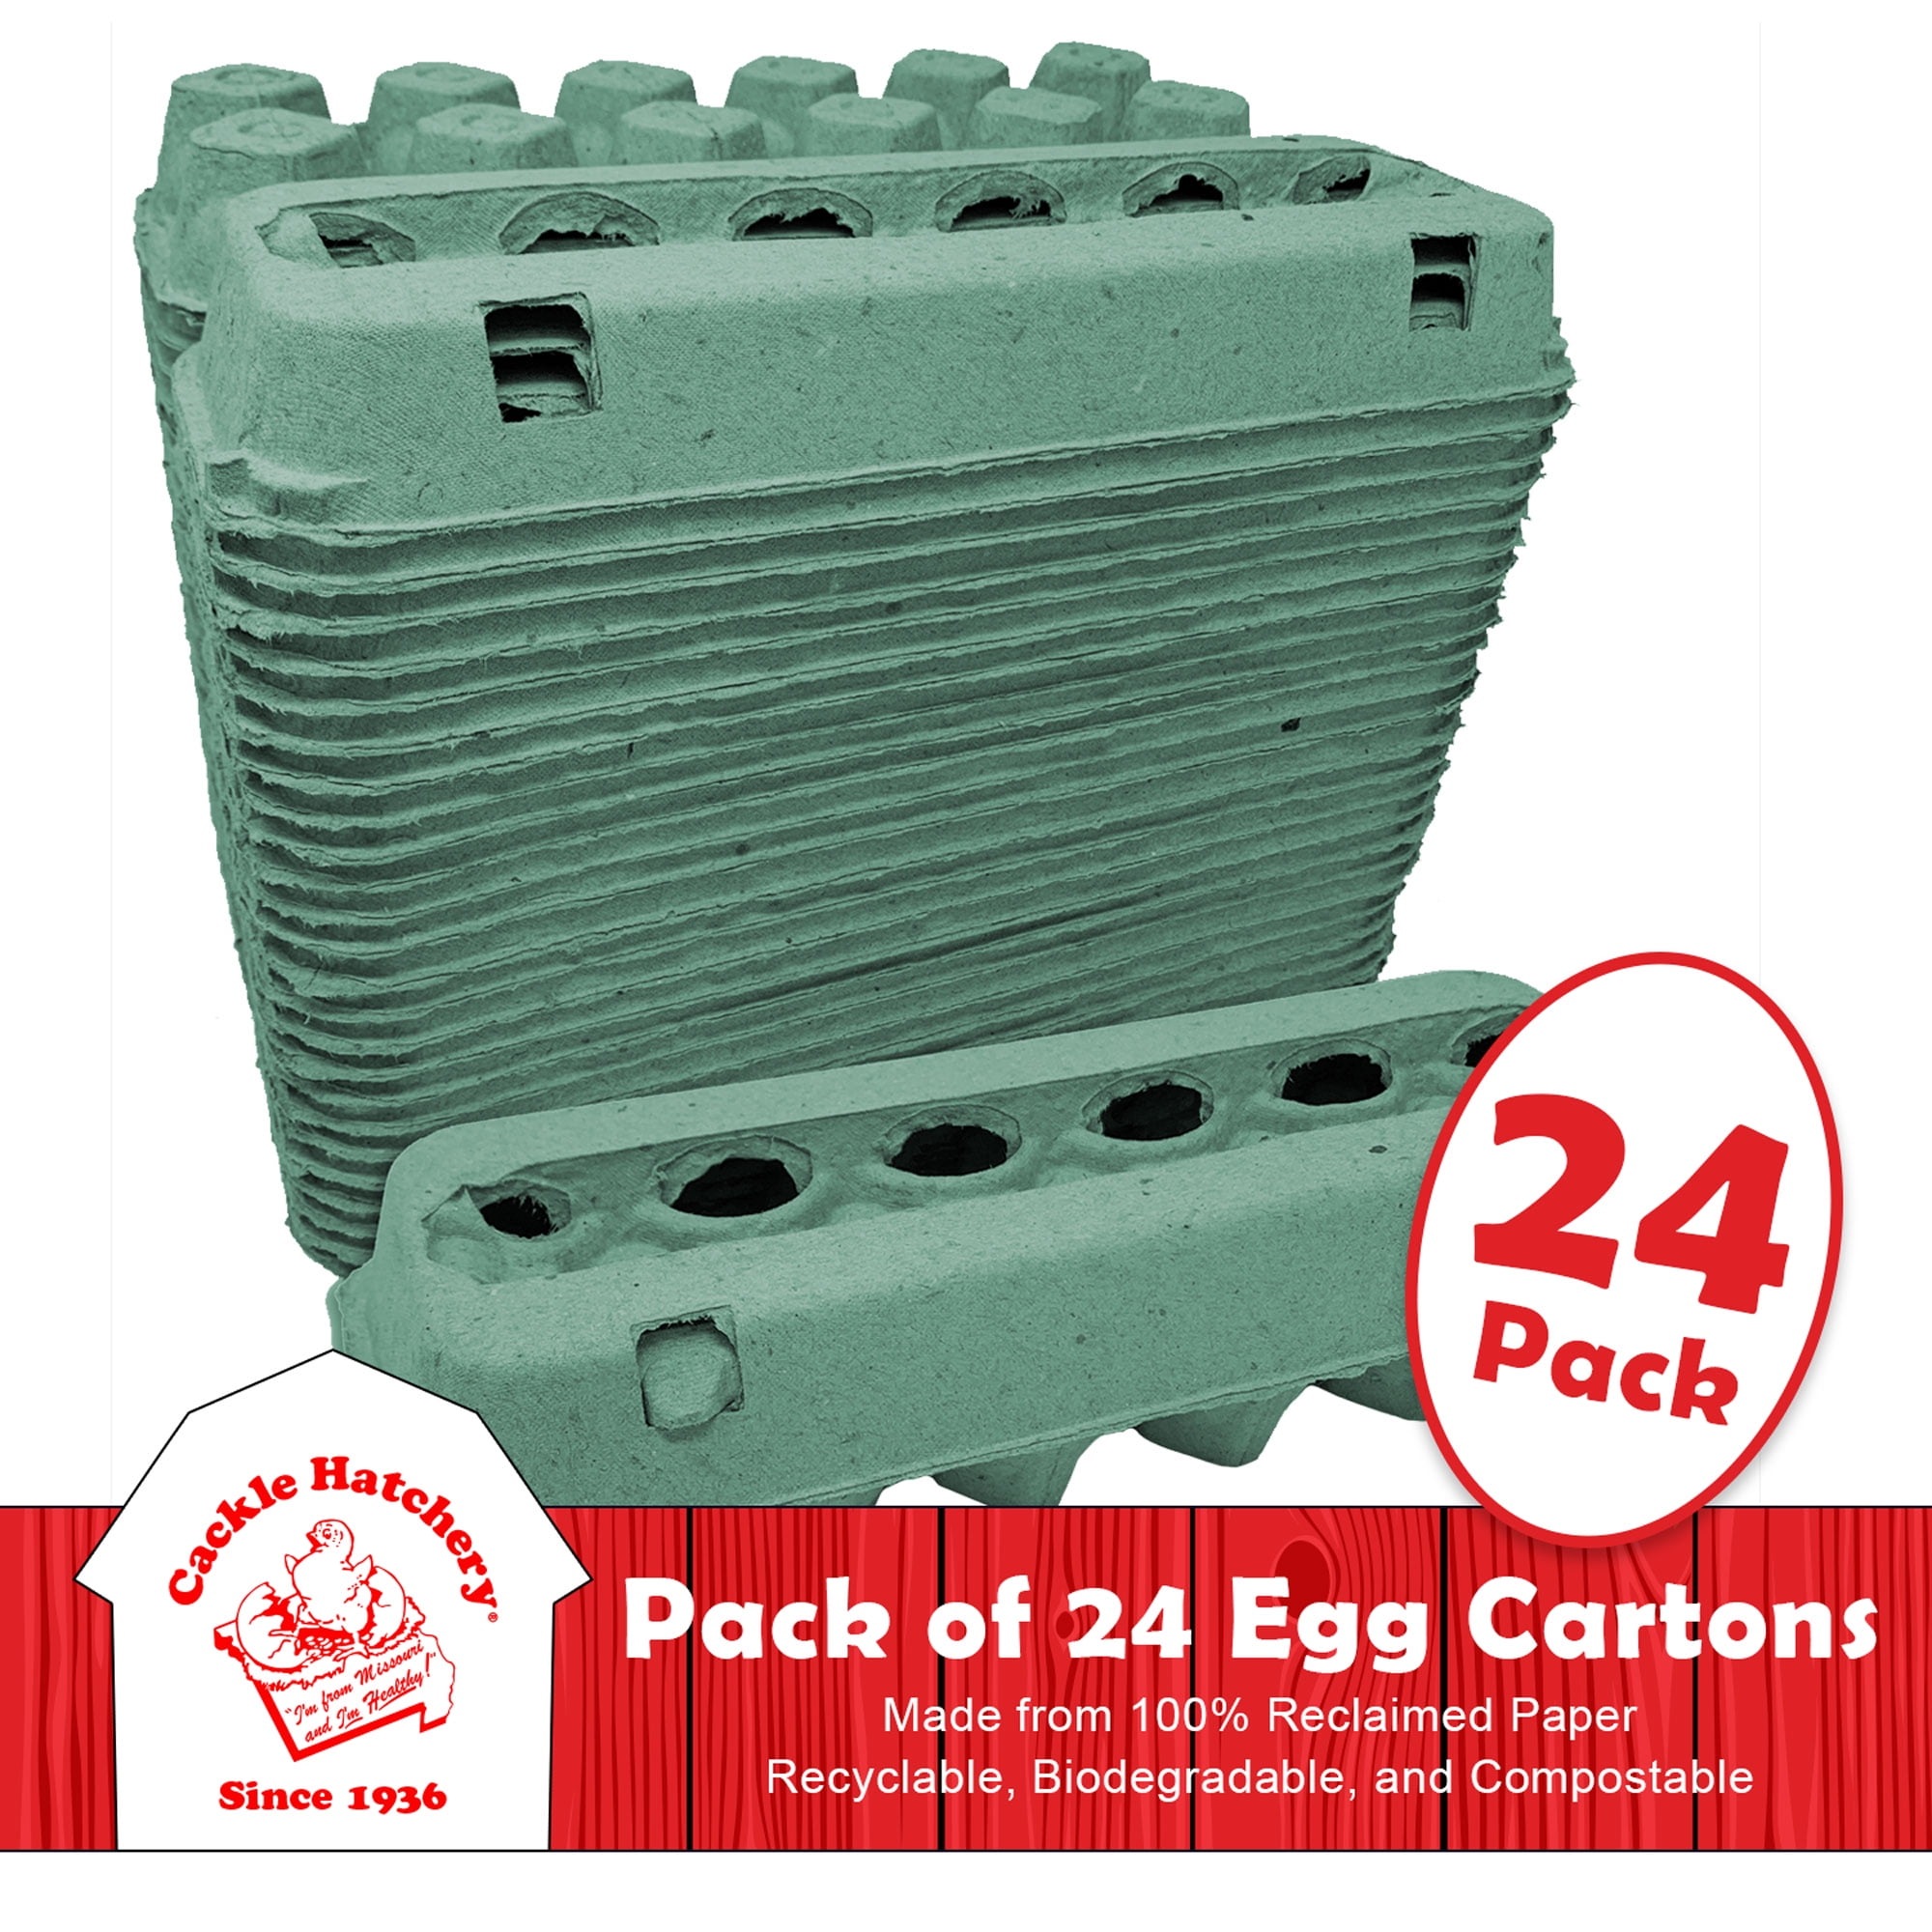 Buy Paper Egg Cartons (Pack of 24) at S&S Worldwide